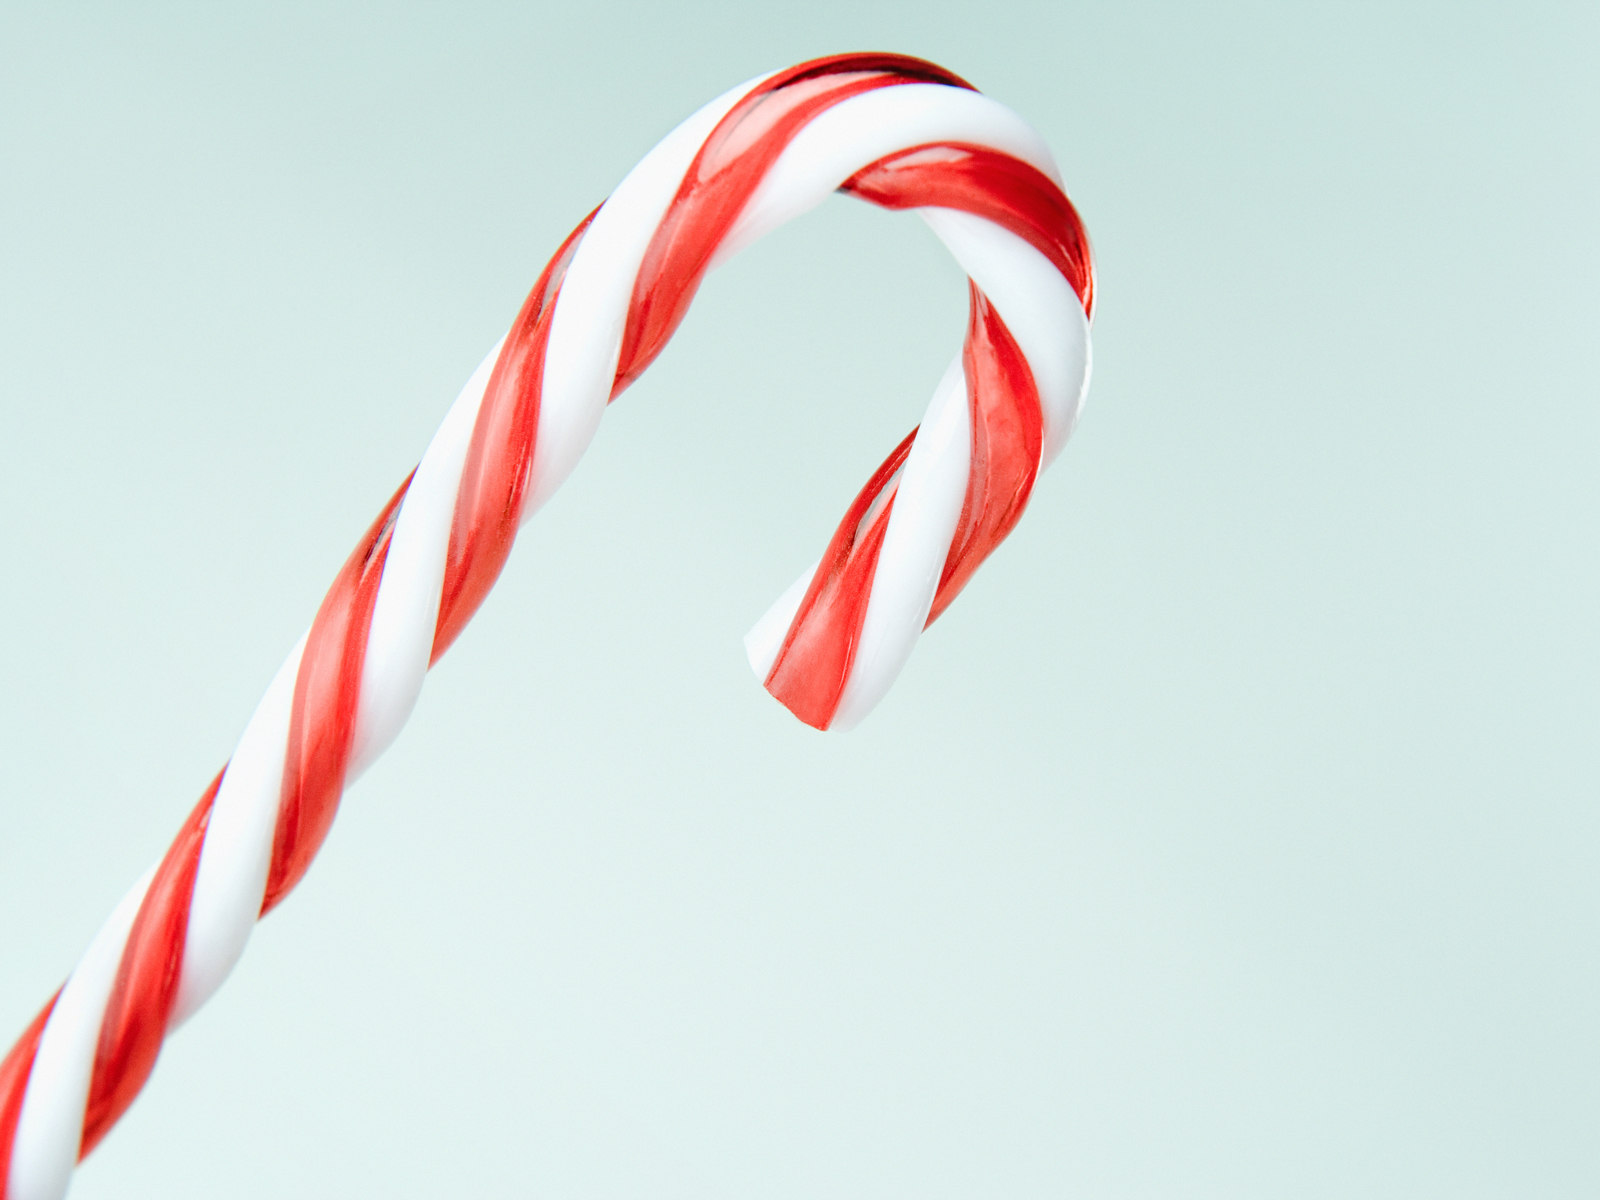 Candy Cane Pictures Wallpaper